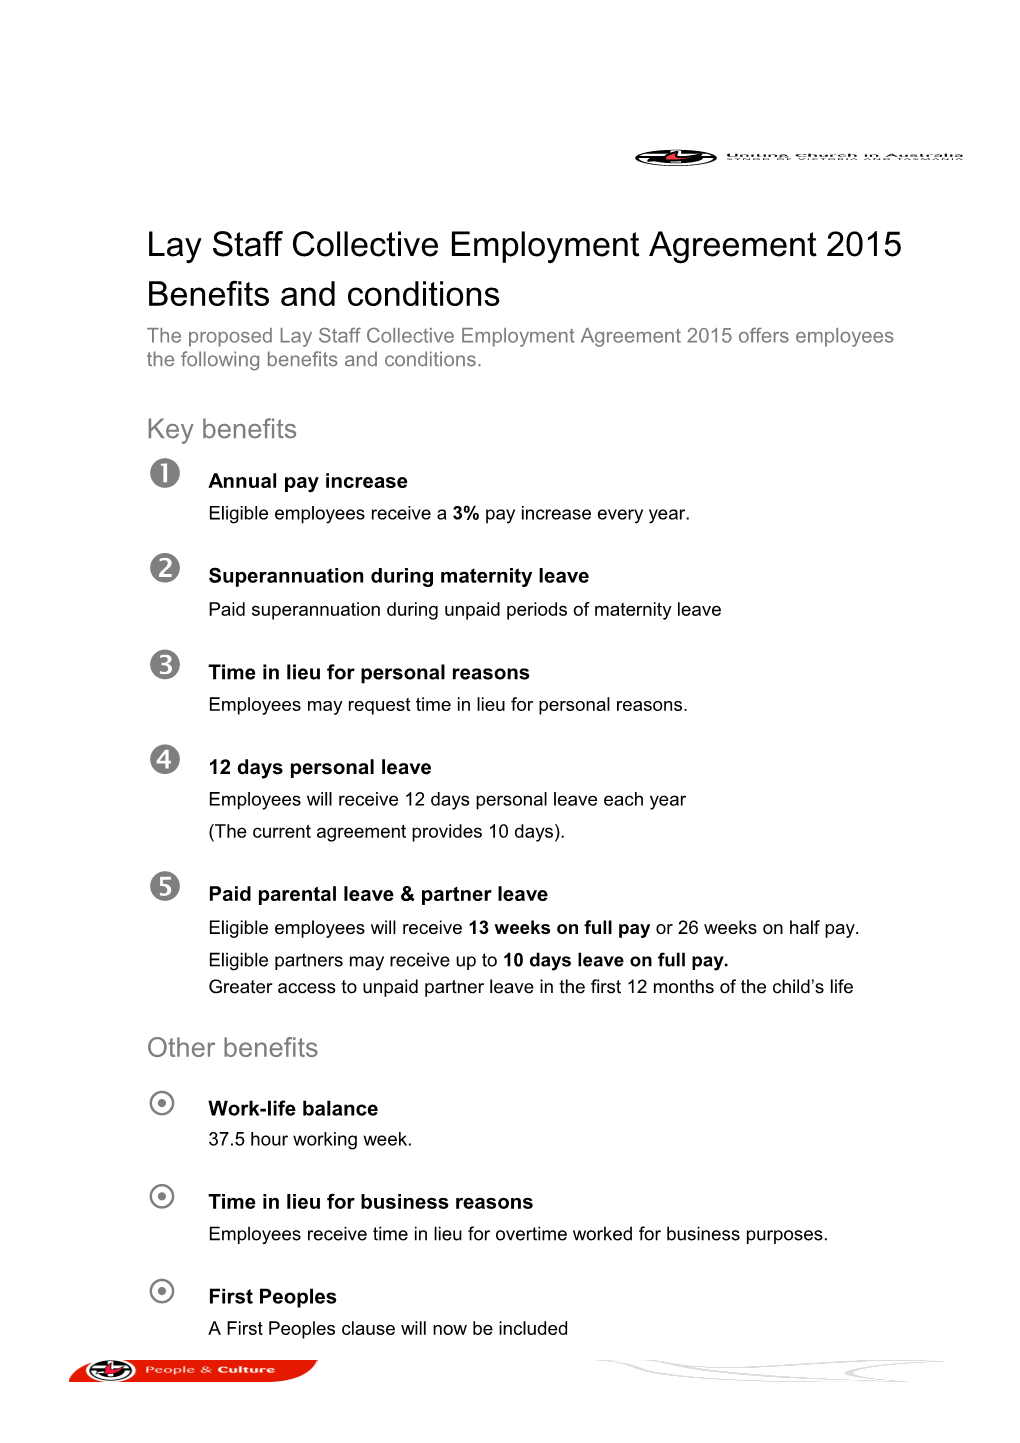 Benefits of the Lay Staff Agreement 2015